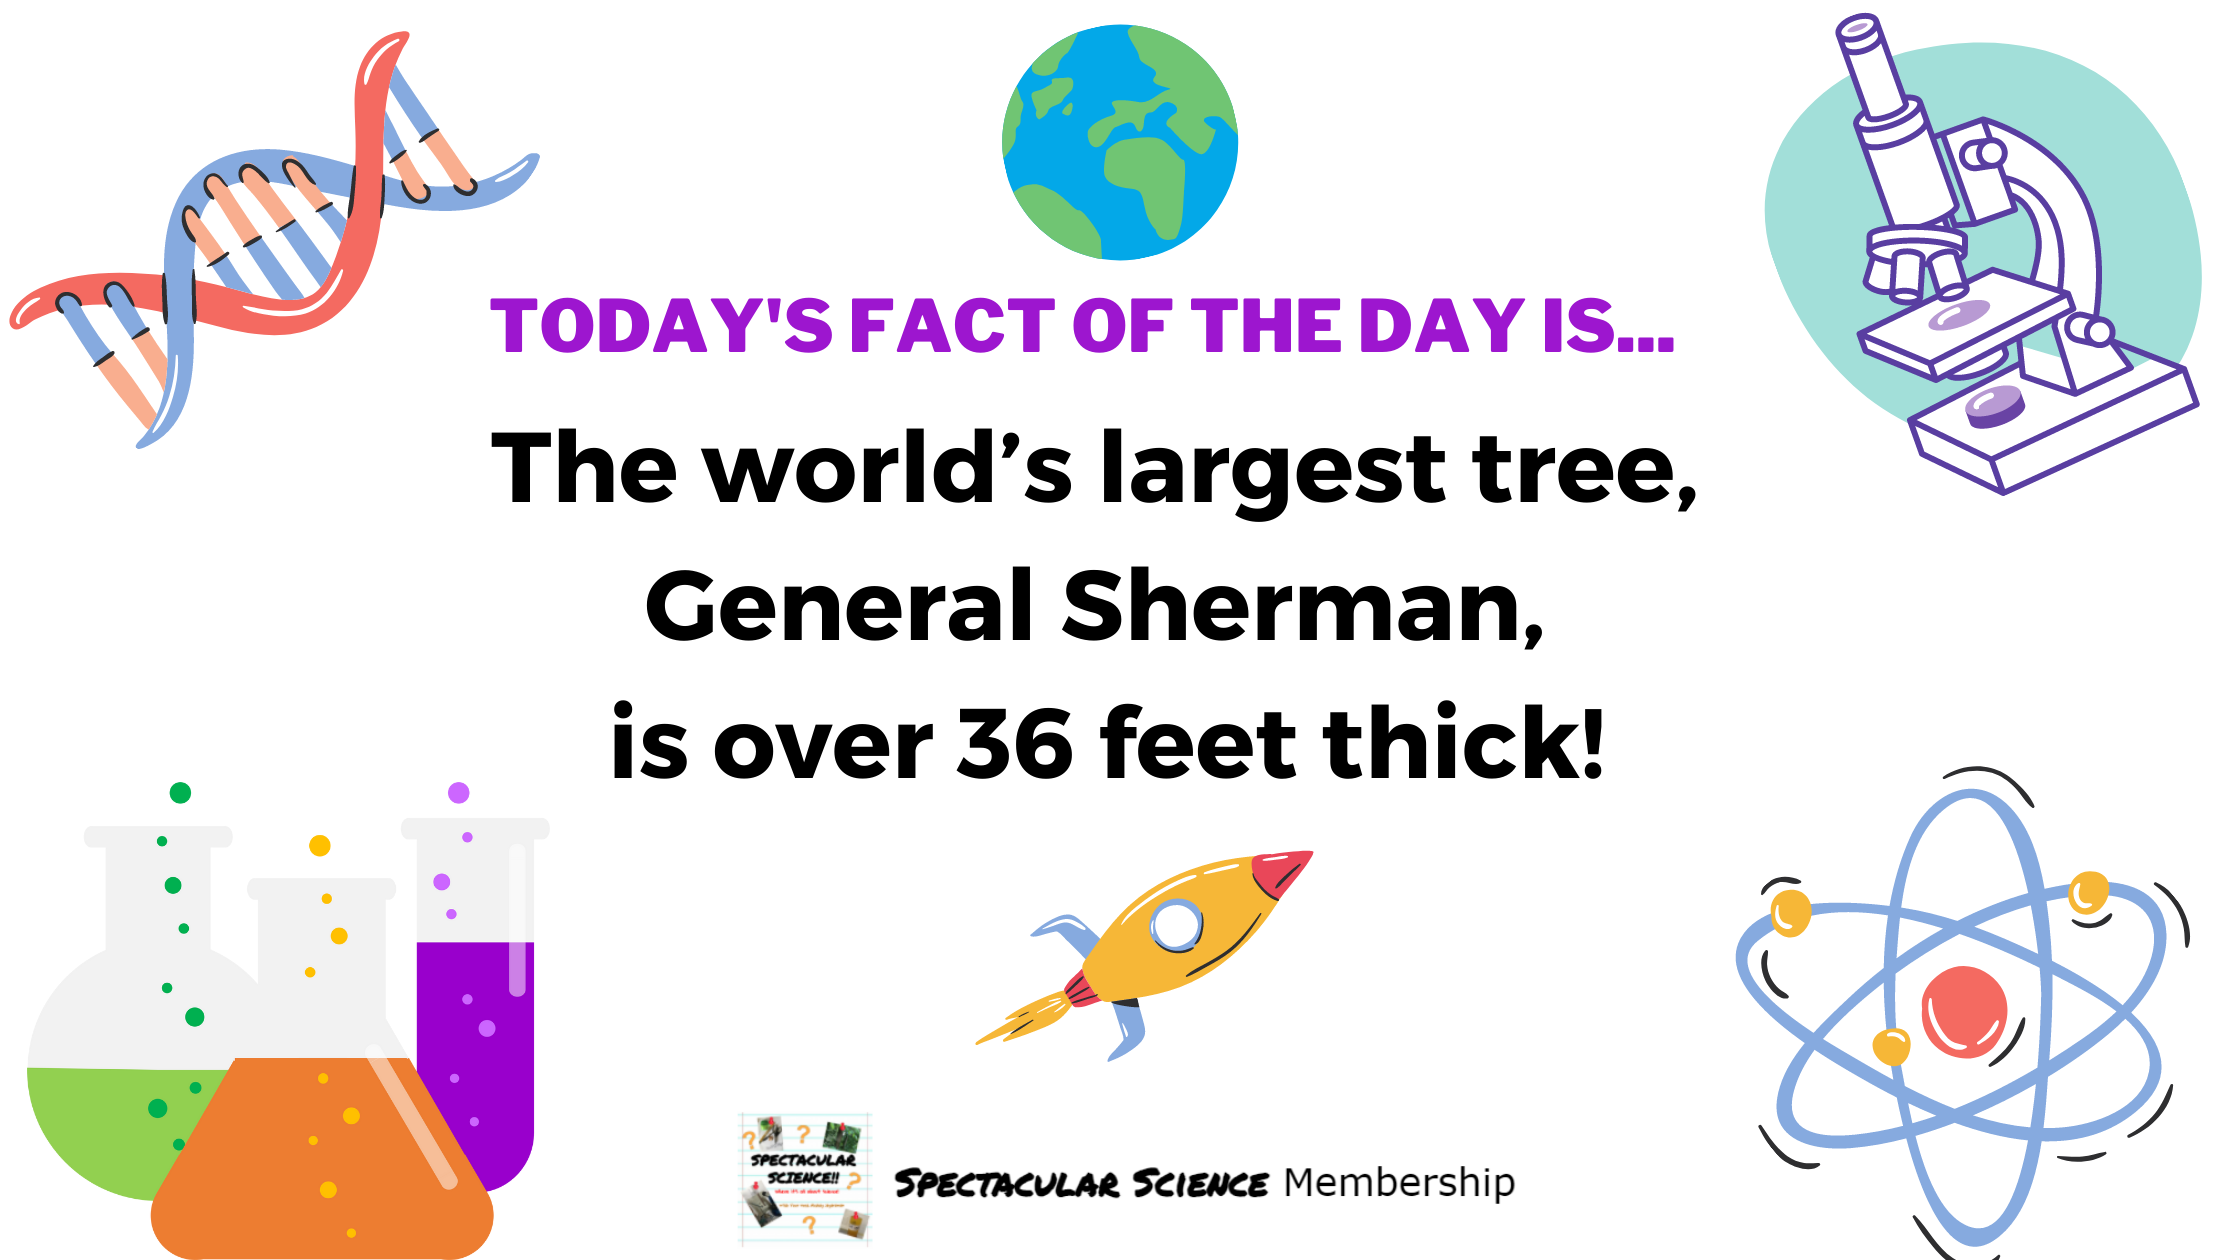 Fact of the Day Image Nov. 20th